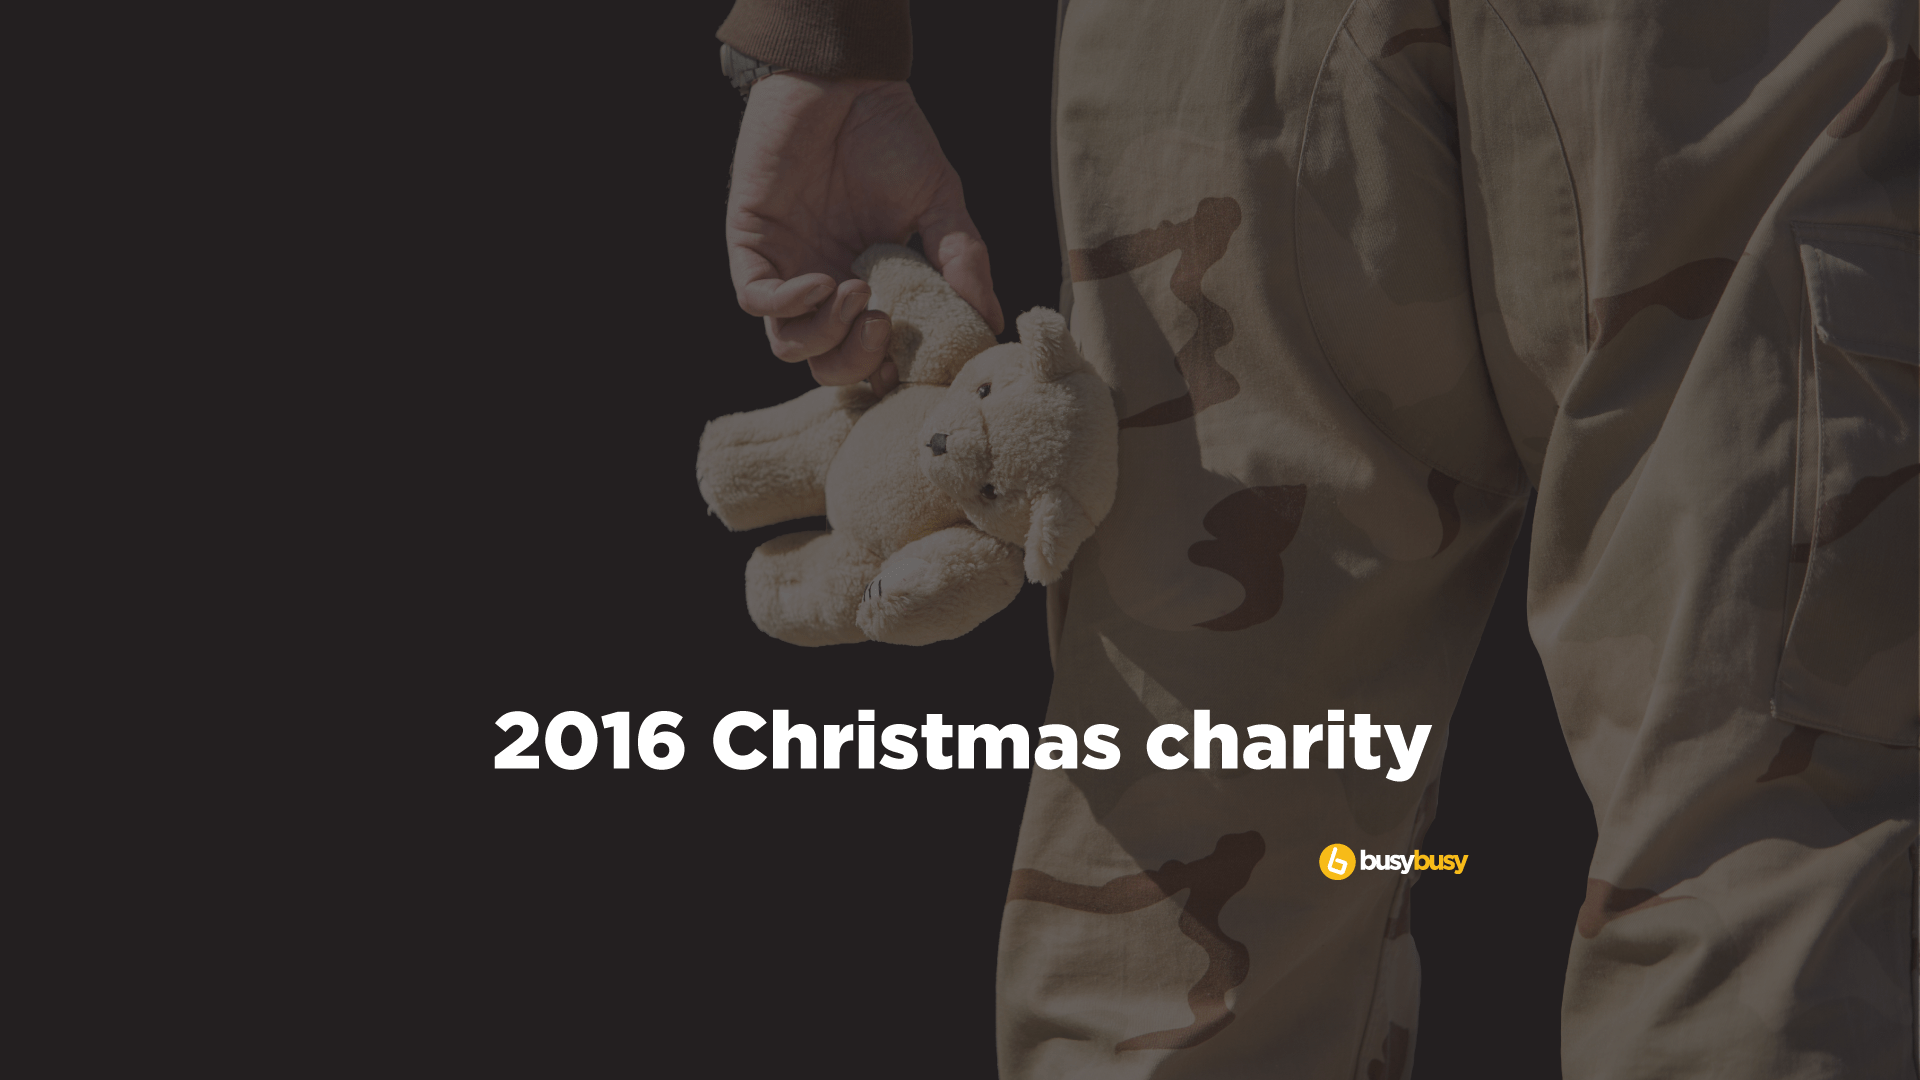 2016 Christmas charity from busybusy